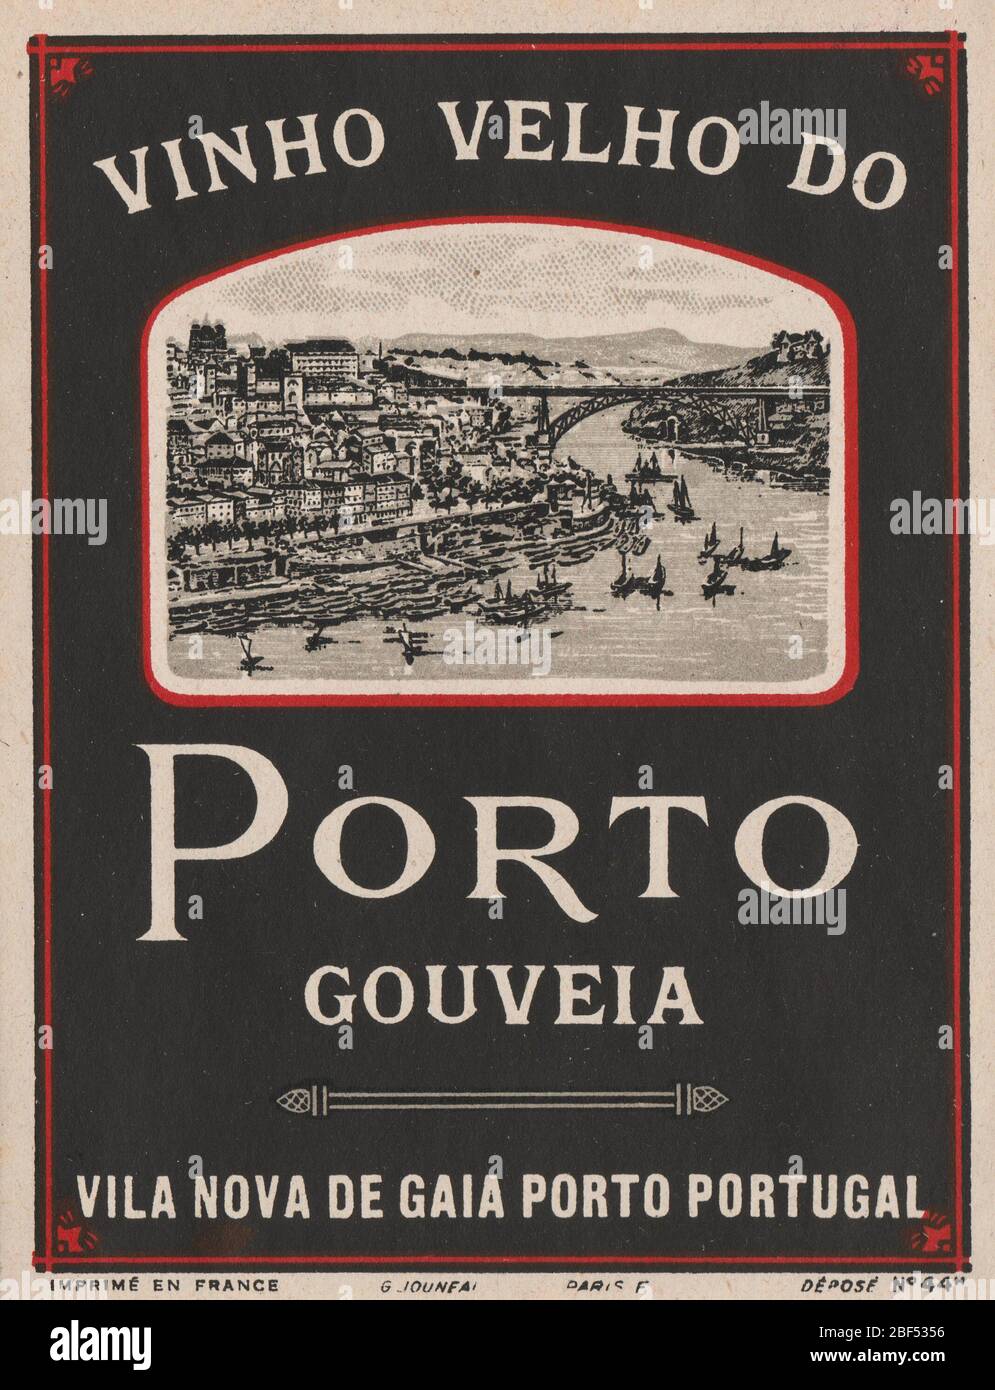 Unused and rare vintage label of Portuguese Port Wine, with a drawing of the Douro river crossing Porto city, Portugal. Stock Photo